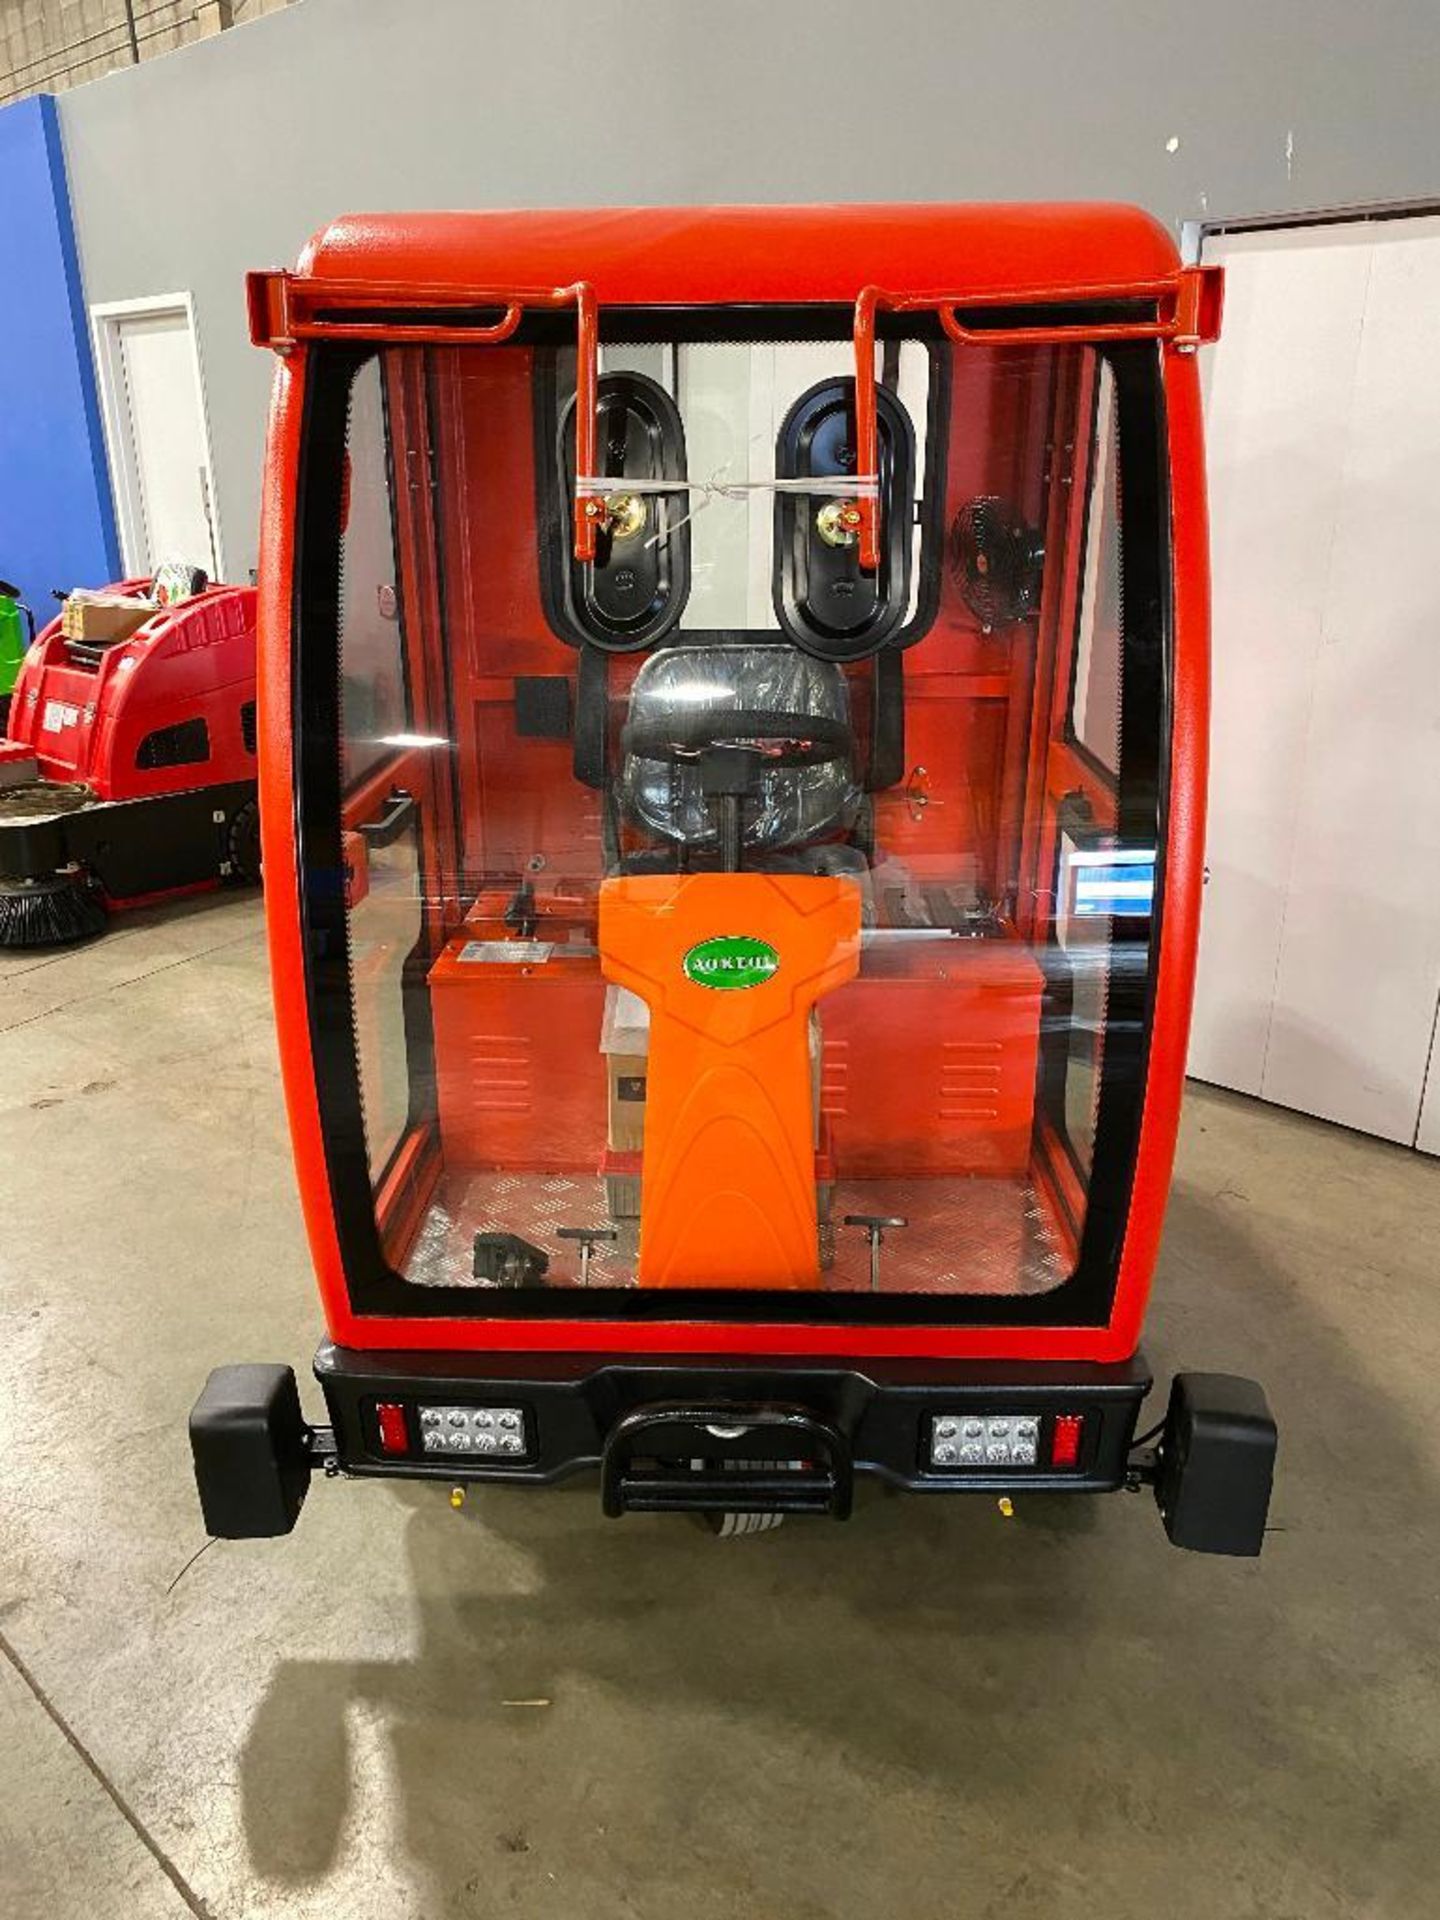 New 2022 Aokeqi 0S-V5 72" Wide Ride-On Electric Industrial Floor Sweeper - Image 3 of 12